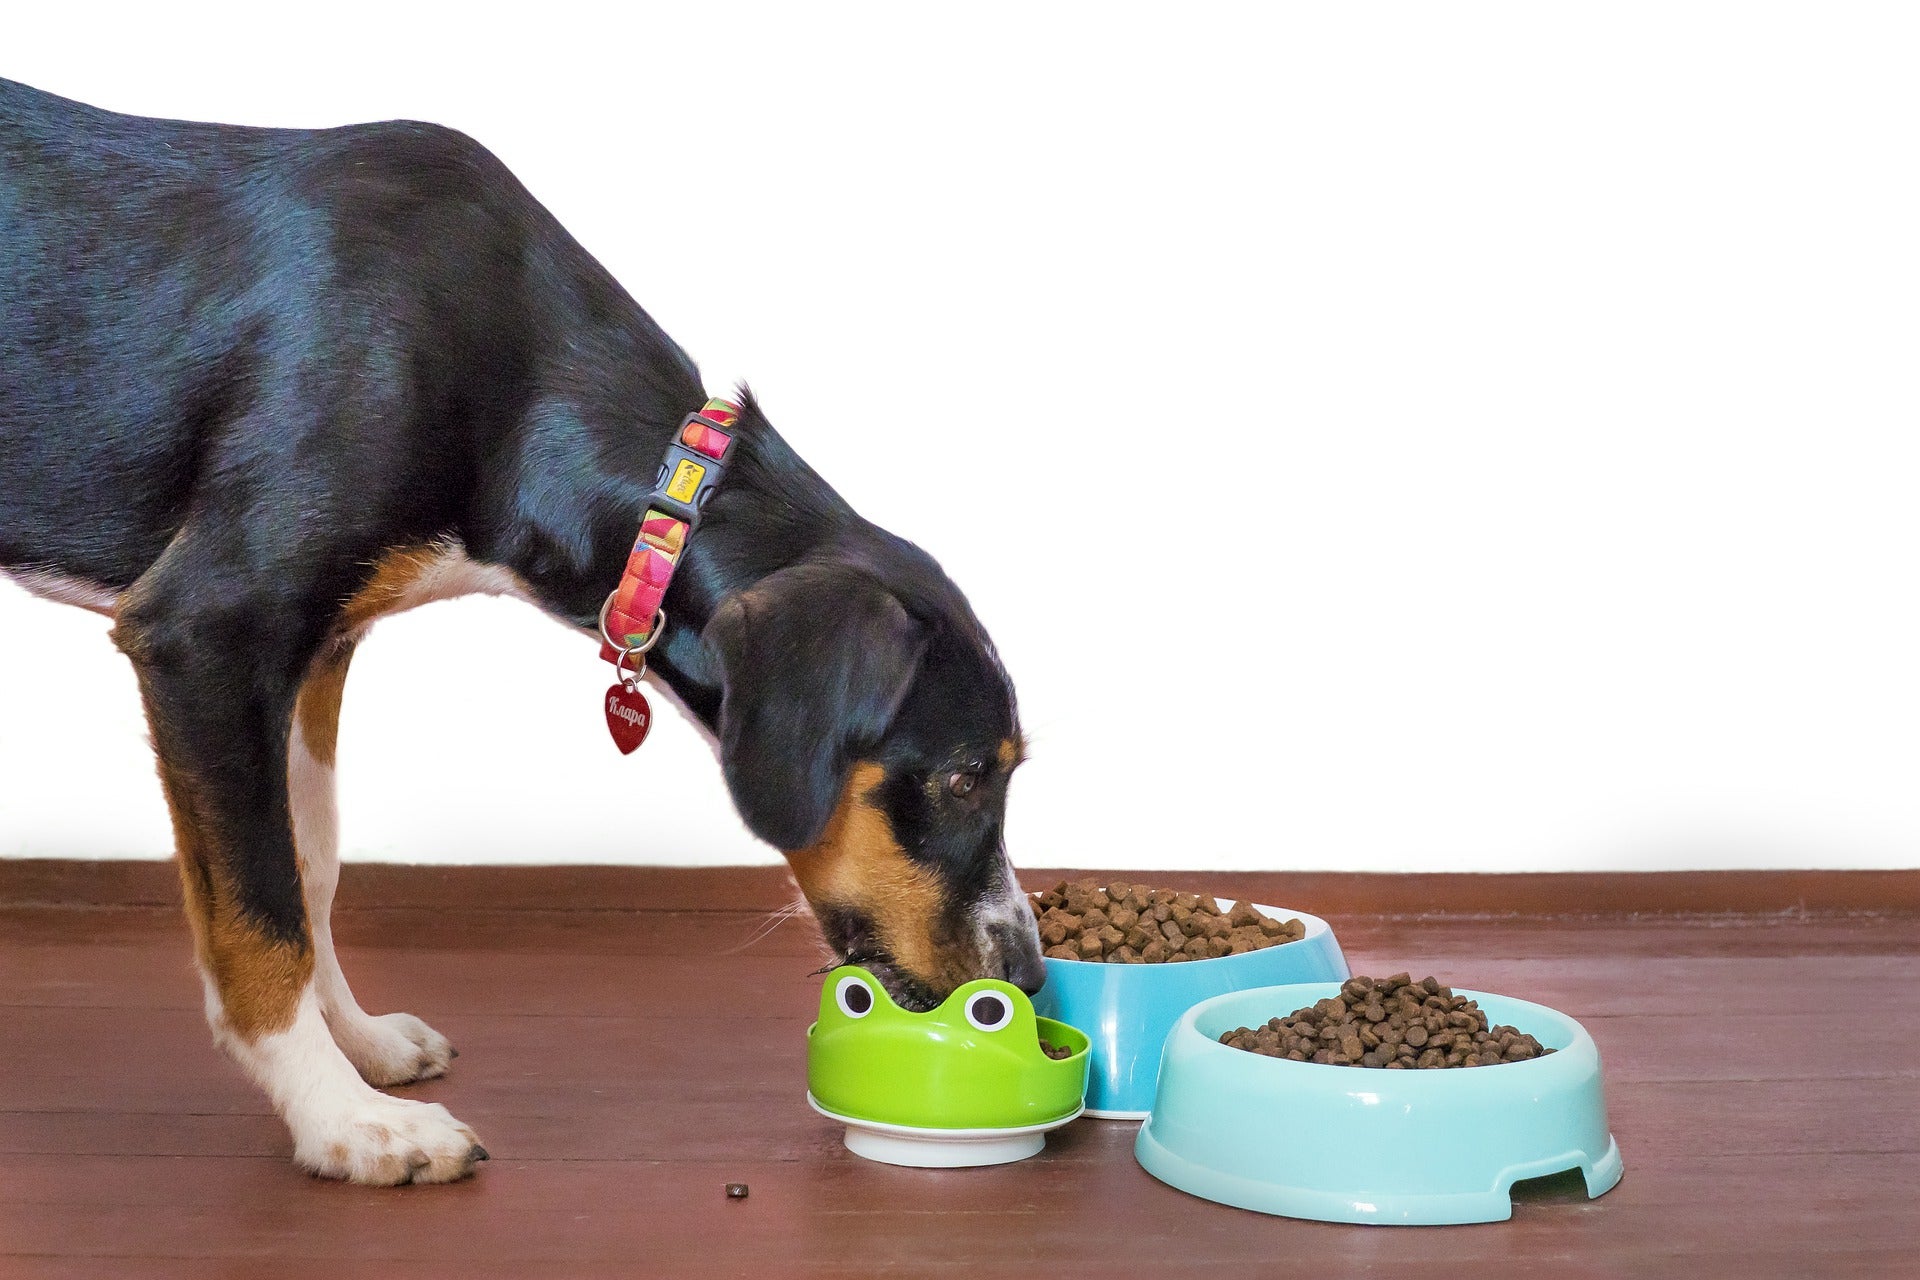 Best Dog Food Delivery Services of 2022